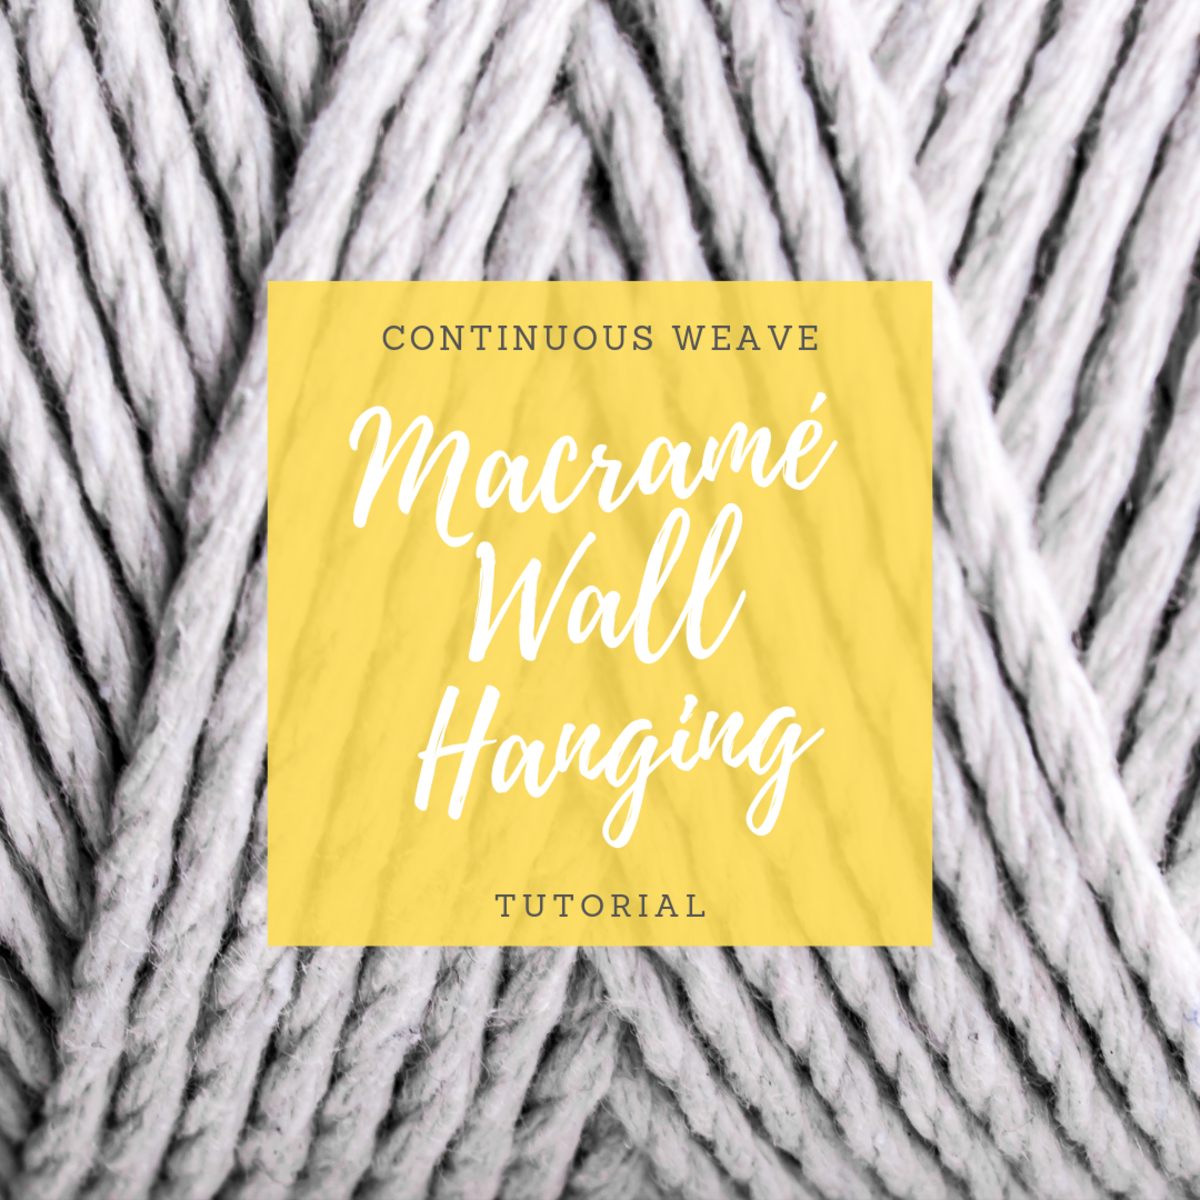 How to Make a Macramé Wall Hanging (With Step-by-Step Photos)